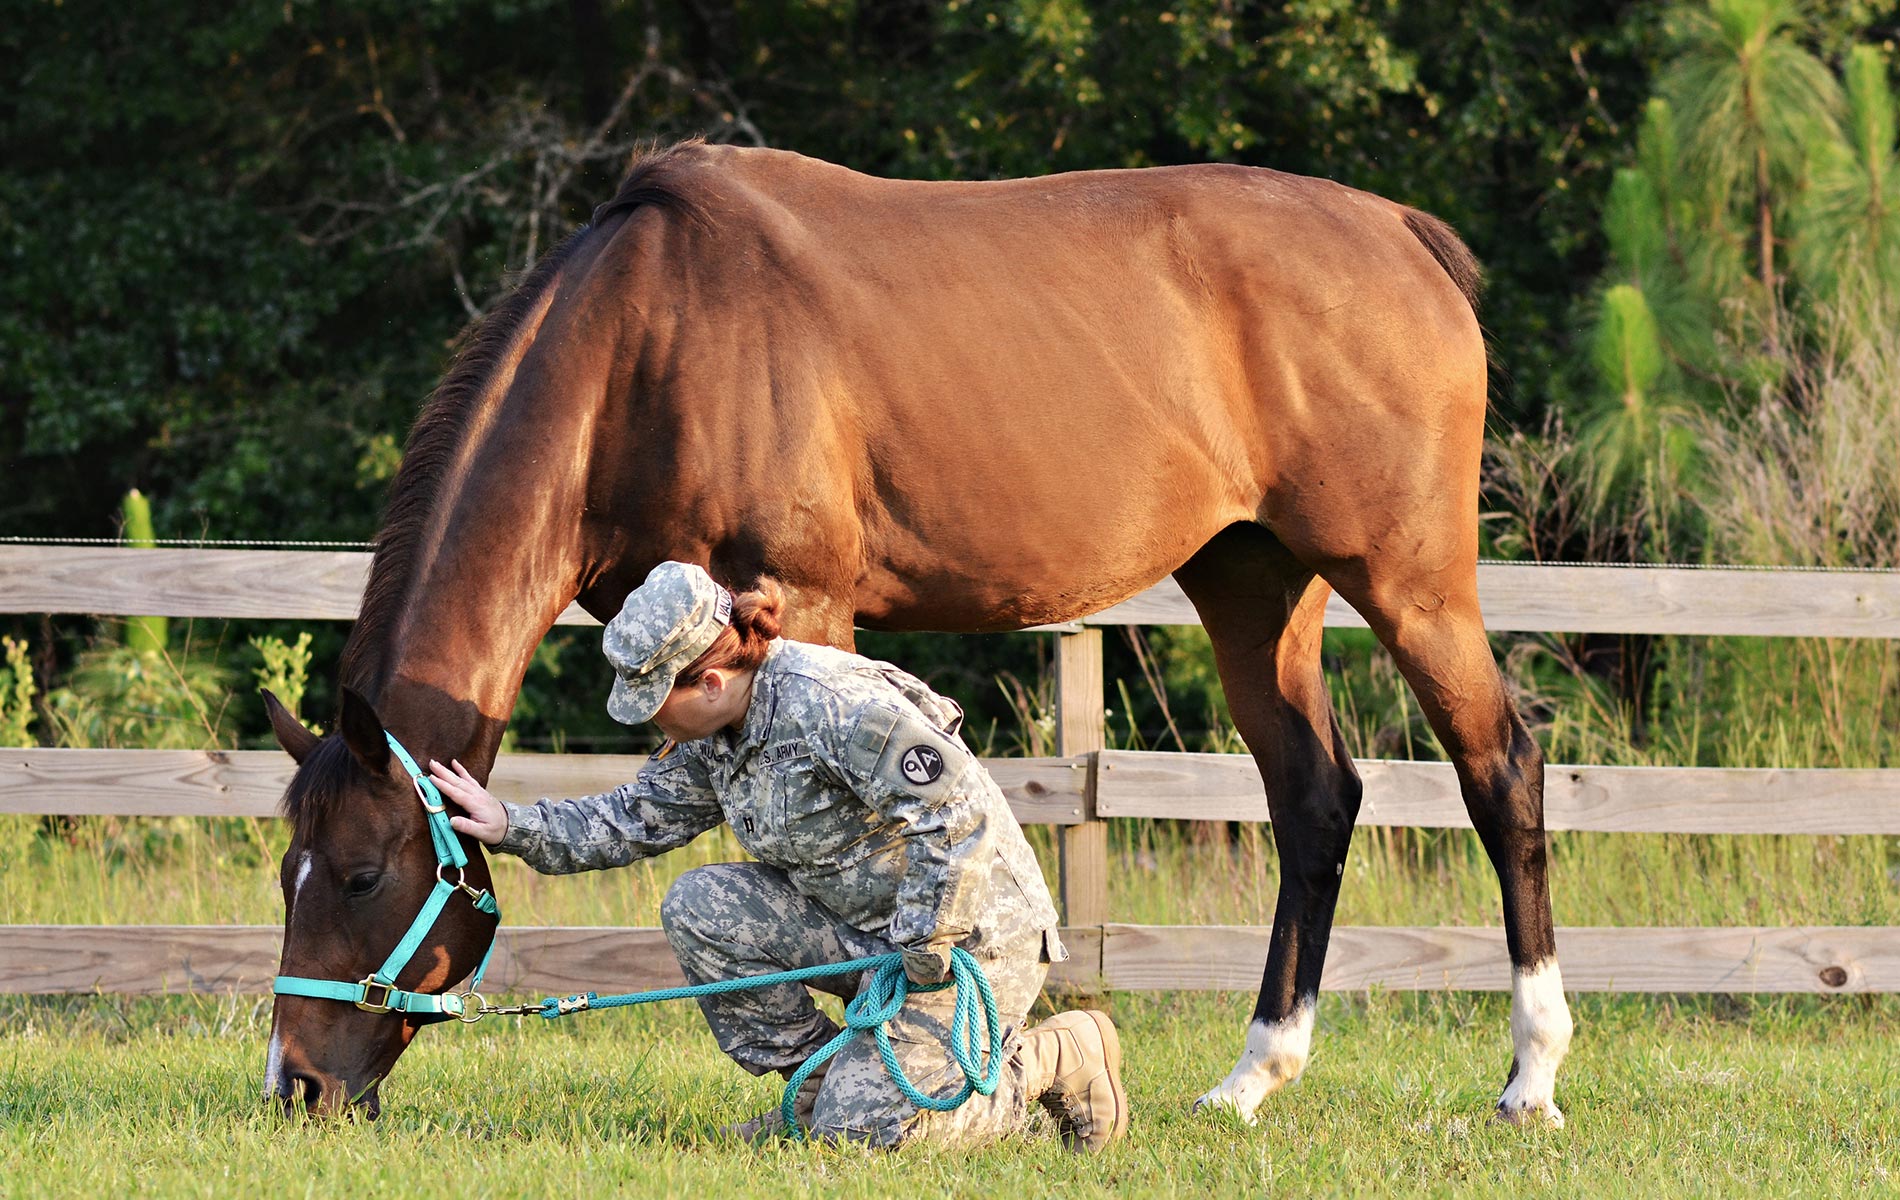 Healing Hoof Steps offers equine therapy programs for veterans, at-risk youth, couples, and all other types of people in need of mental and emotional support.